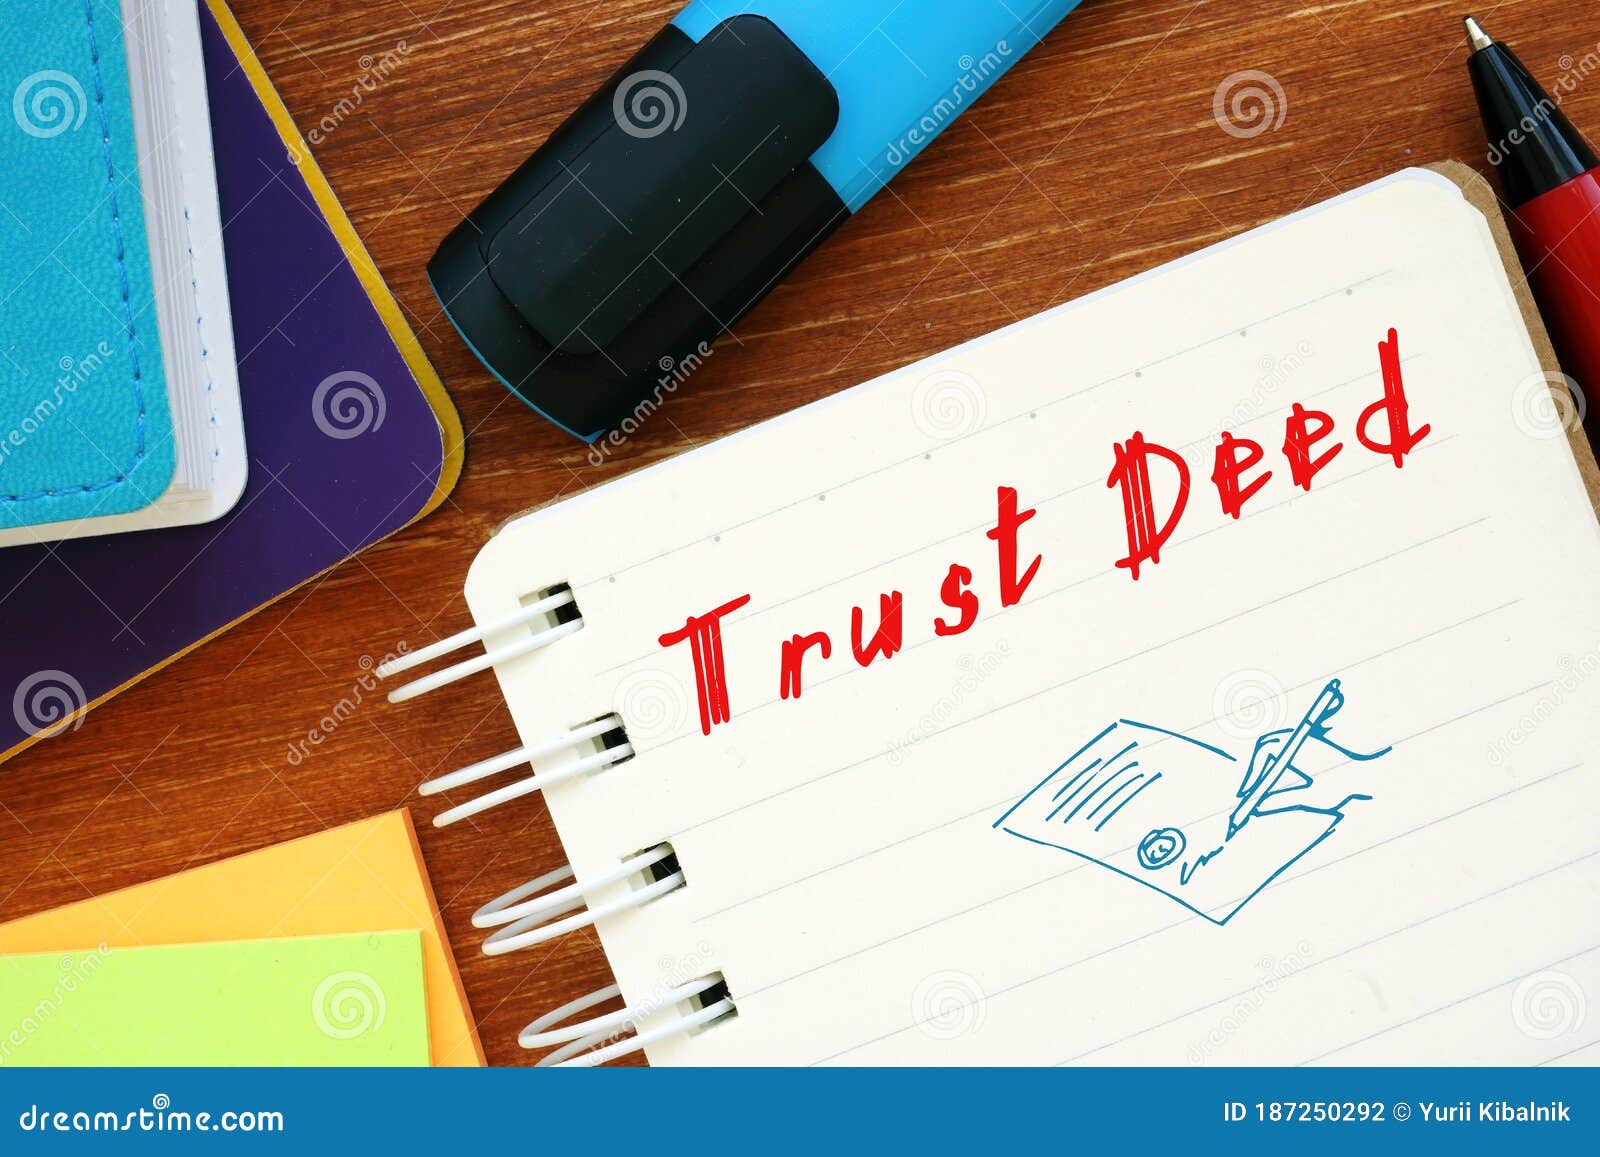 conceptual photo about trust deed with handwritten phrase